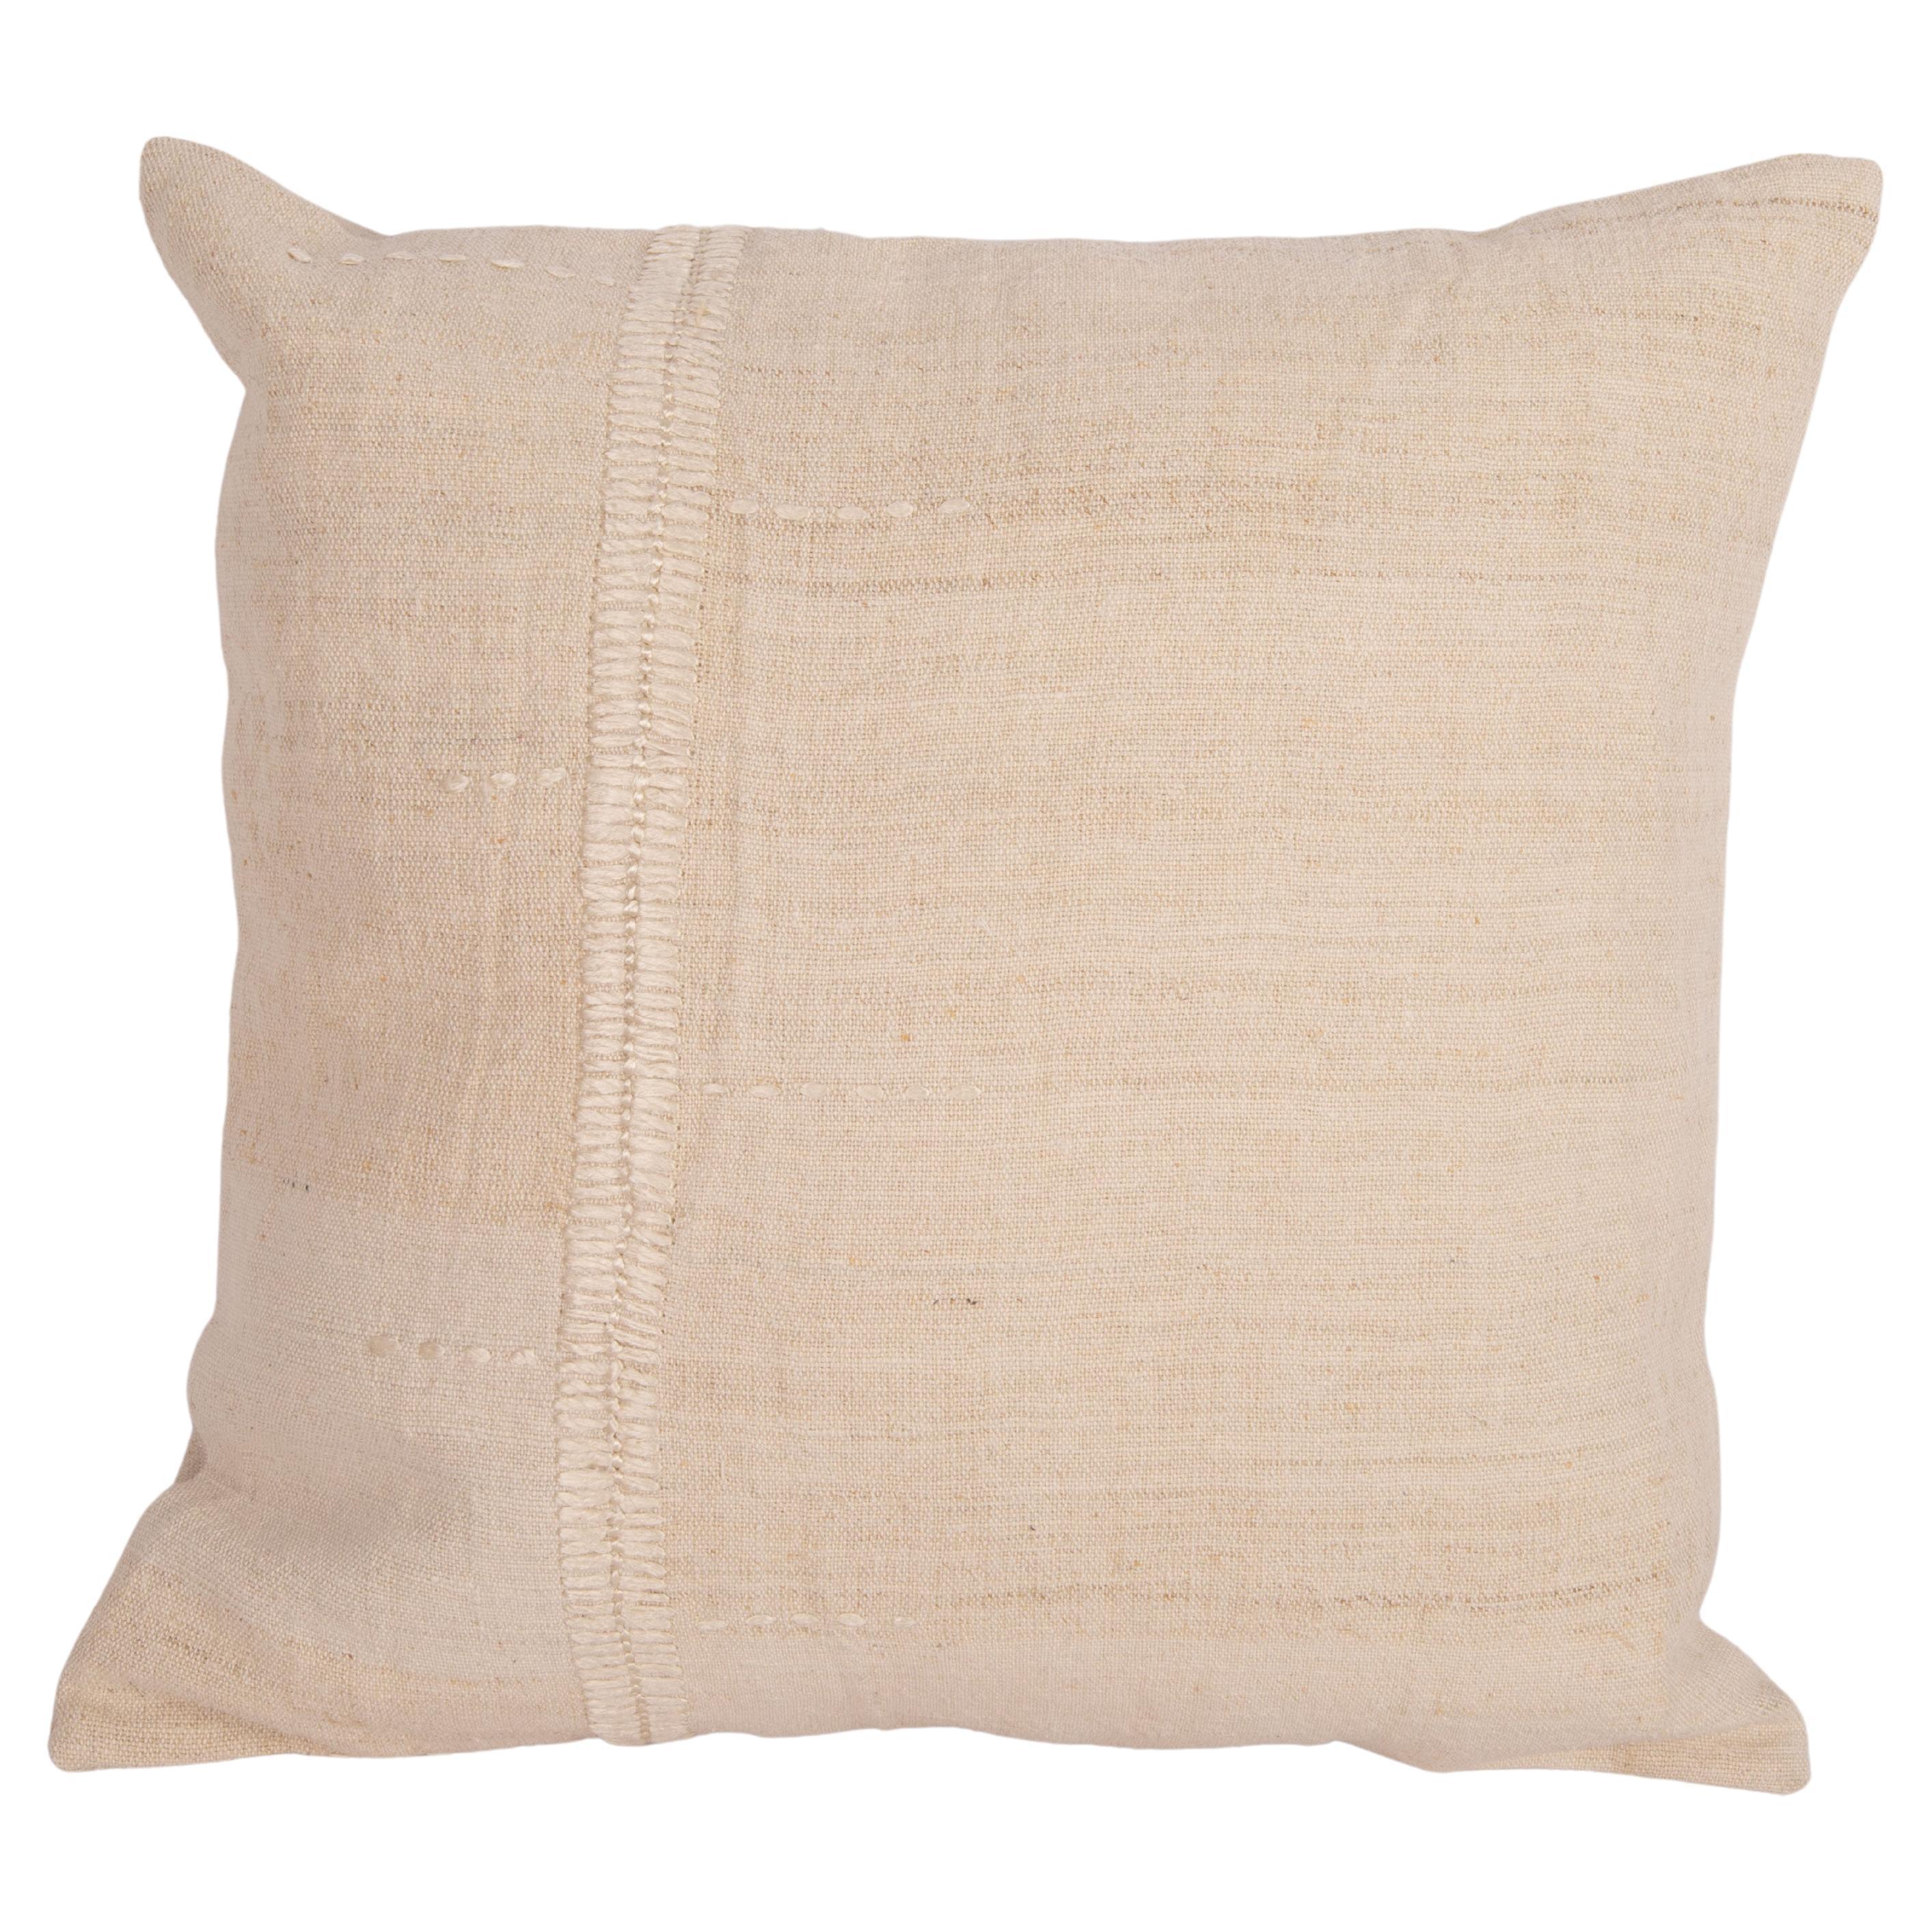 Rustic Pillow Case Made from a Vintage Anatolian Linen Fabric Mid 20th C. For Sale